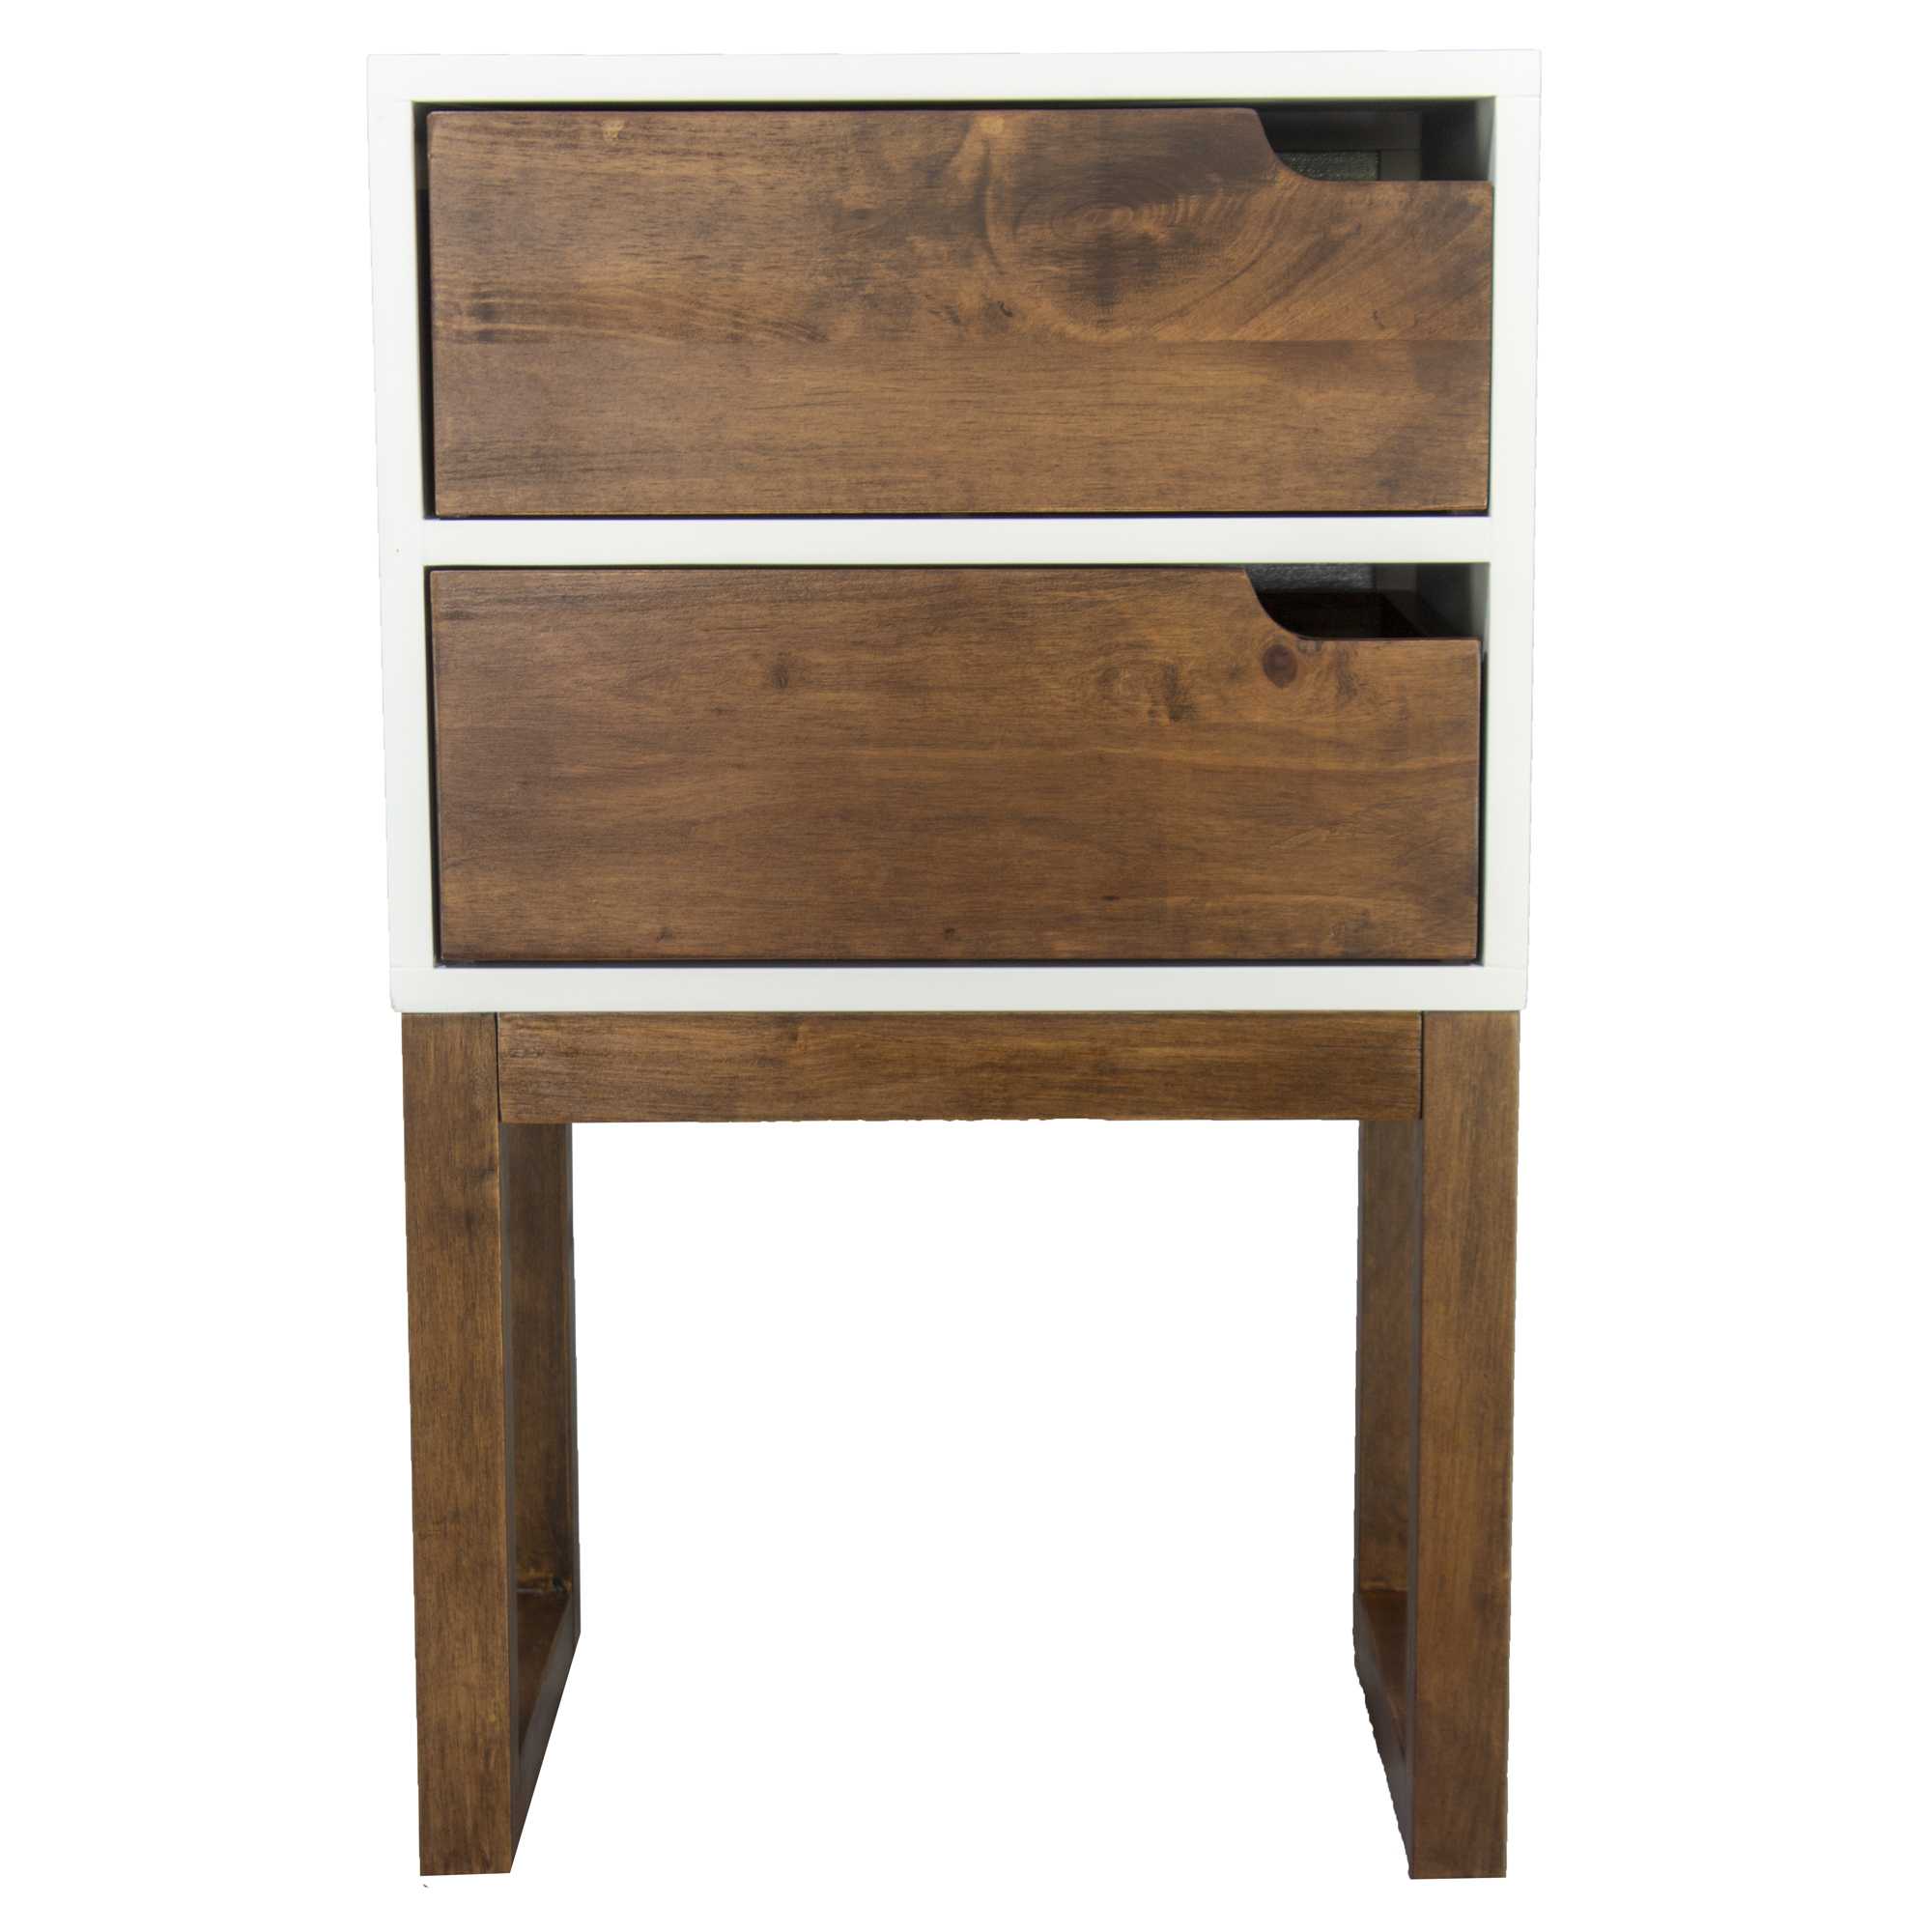 16" X 12" X 26" White and Mocha Solid Wood Two Drawer Side Table